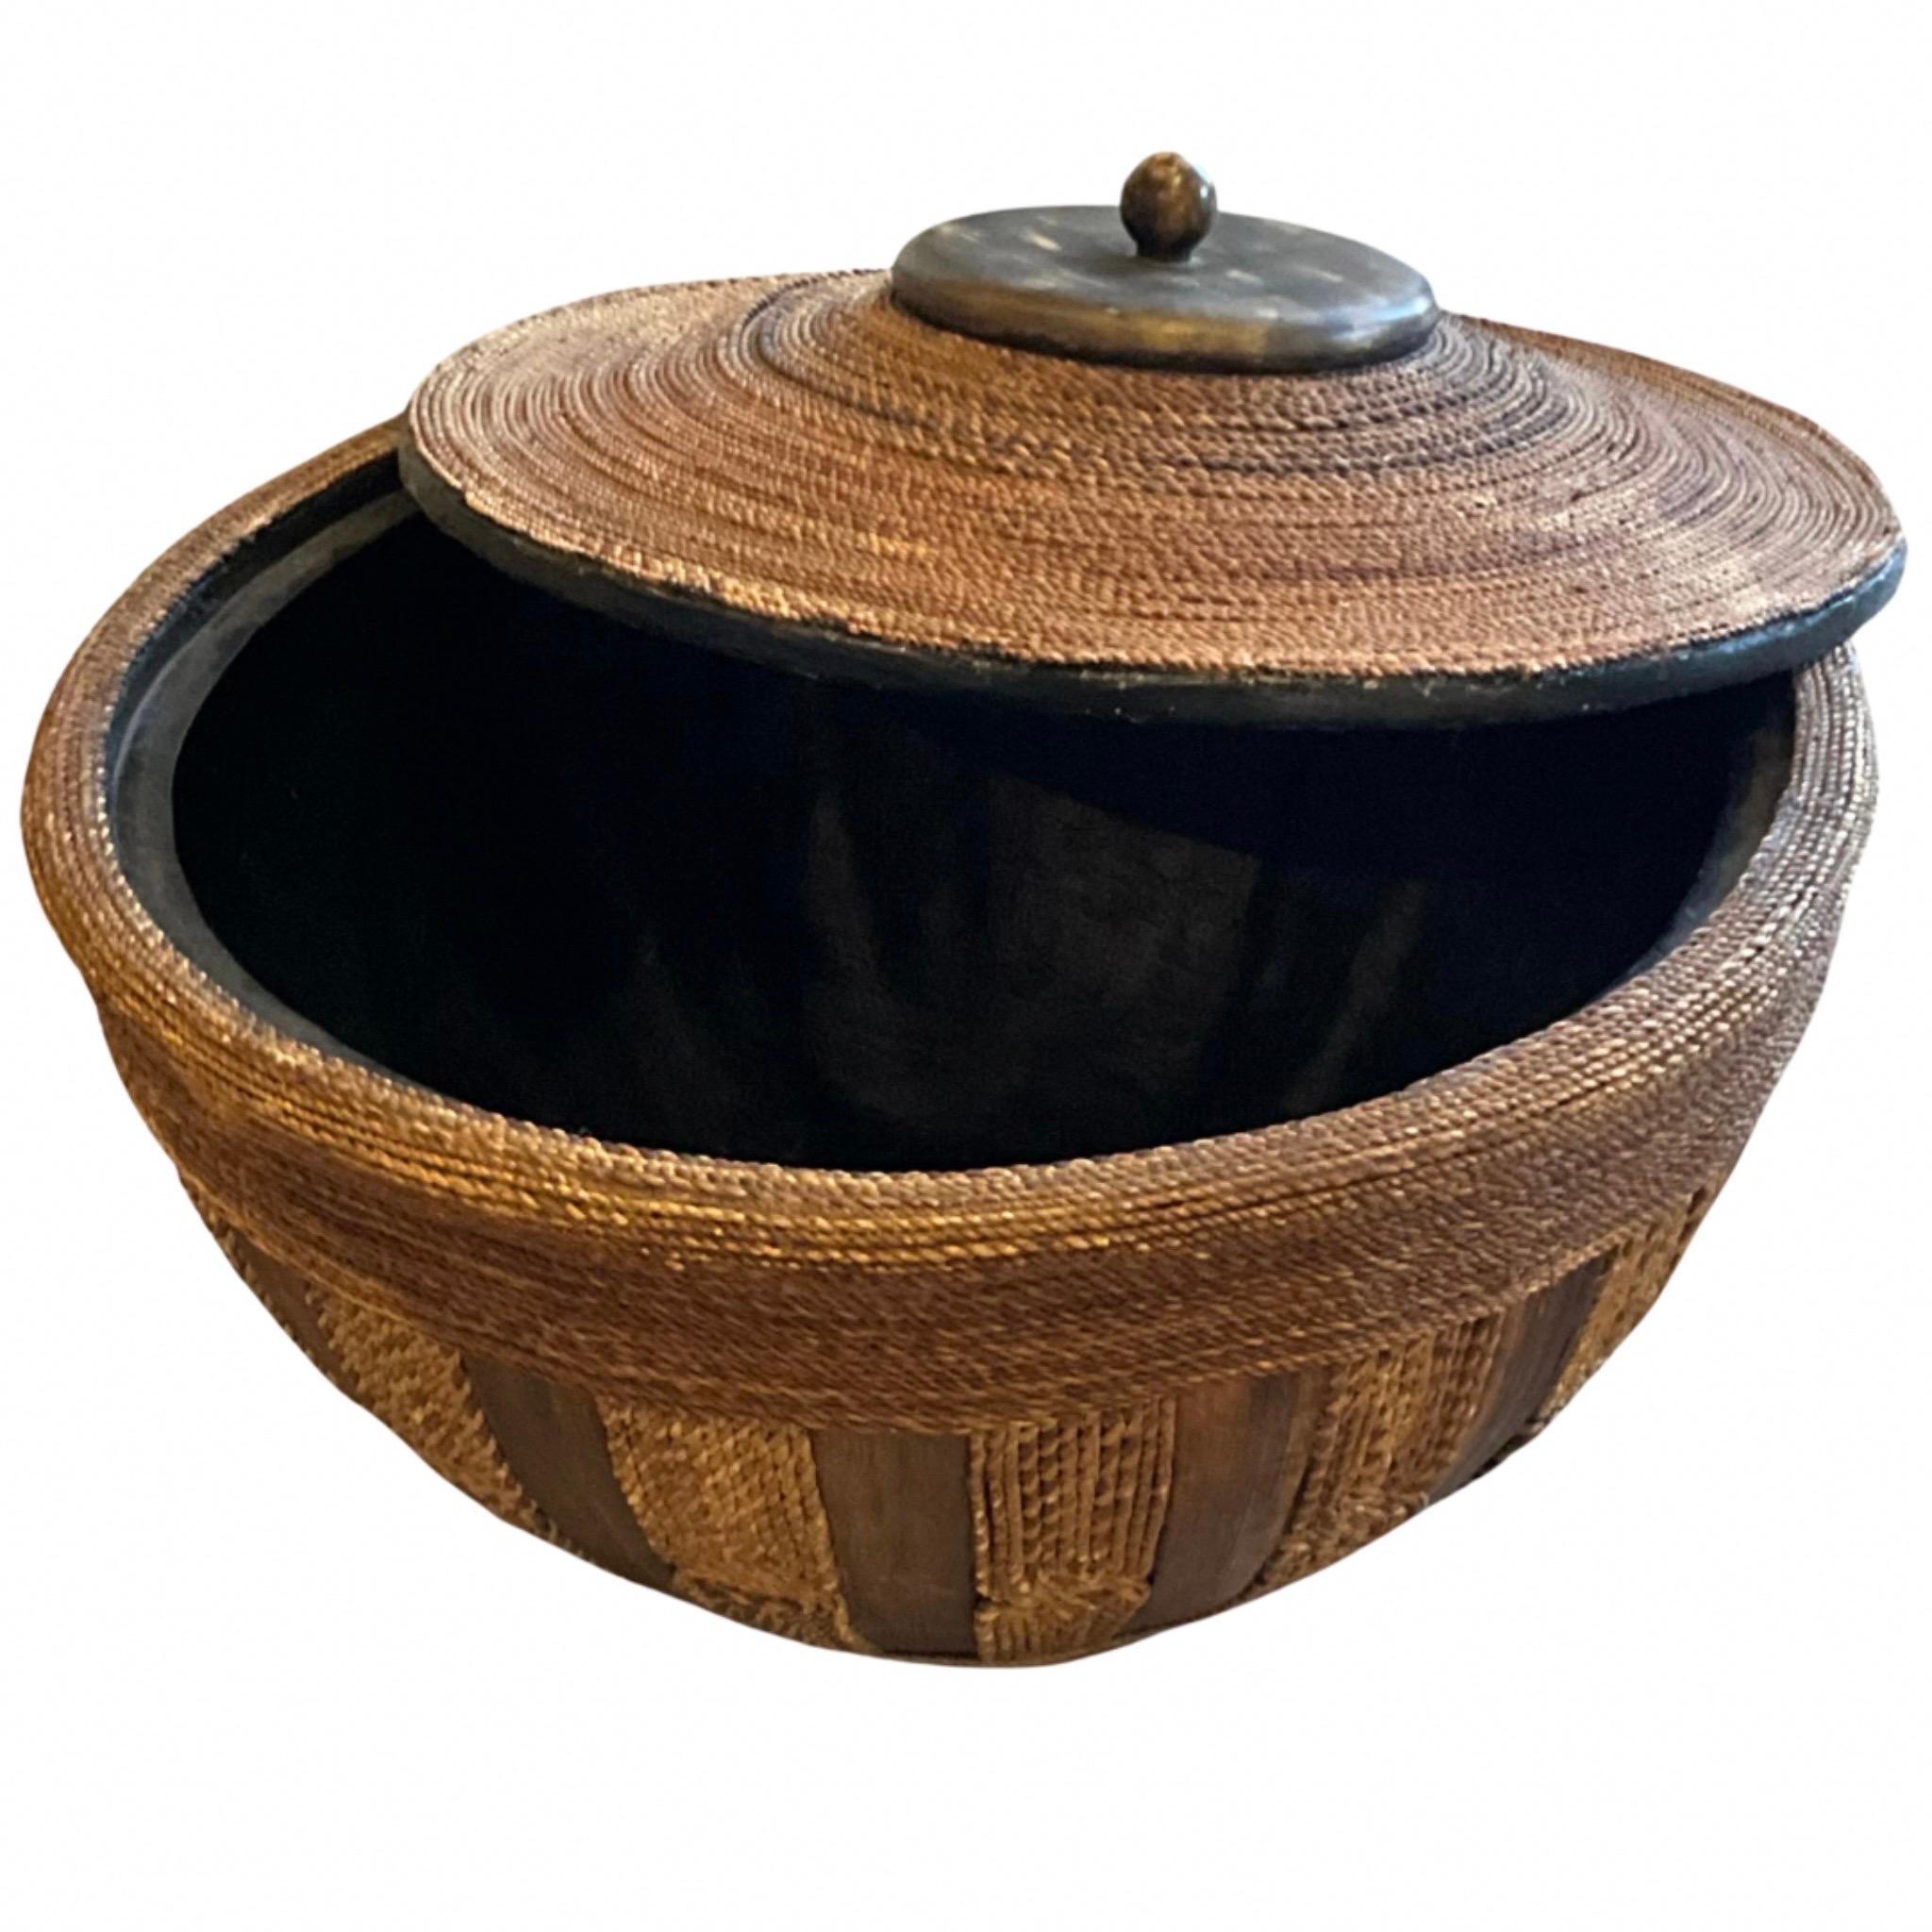 Natural Fiber Natural Woven Fiber & Wood Container with Lid